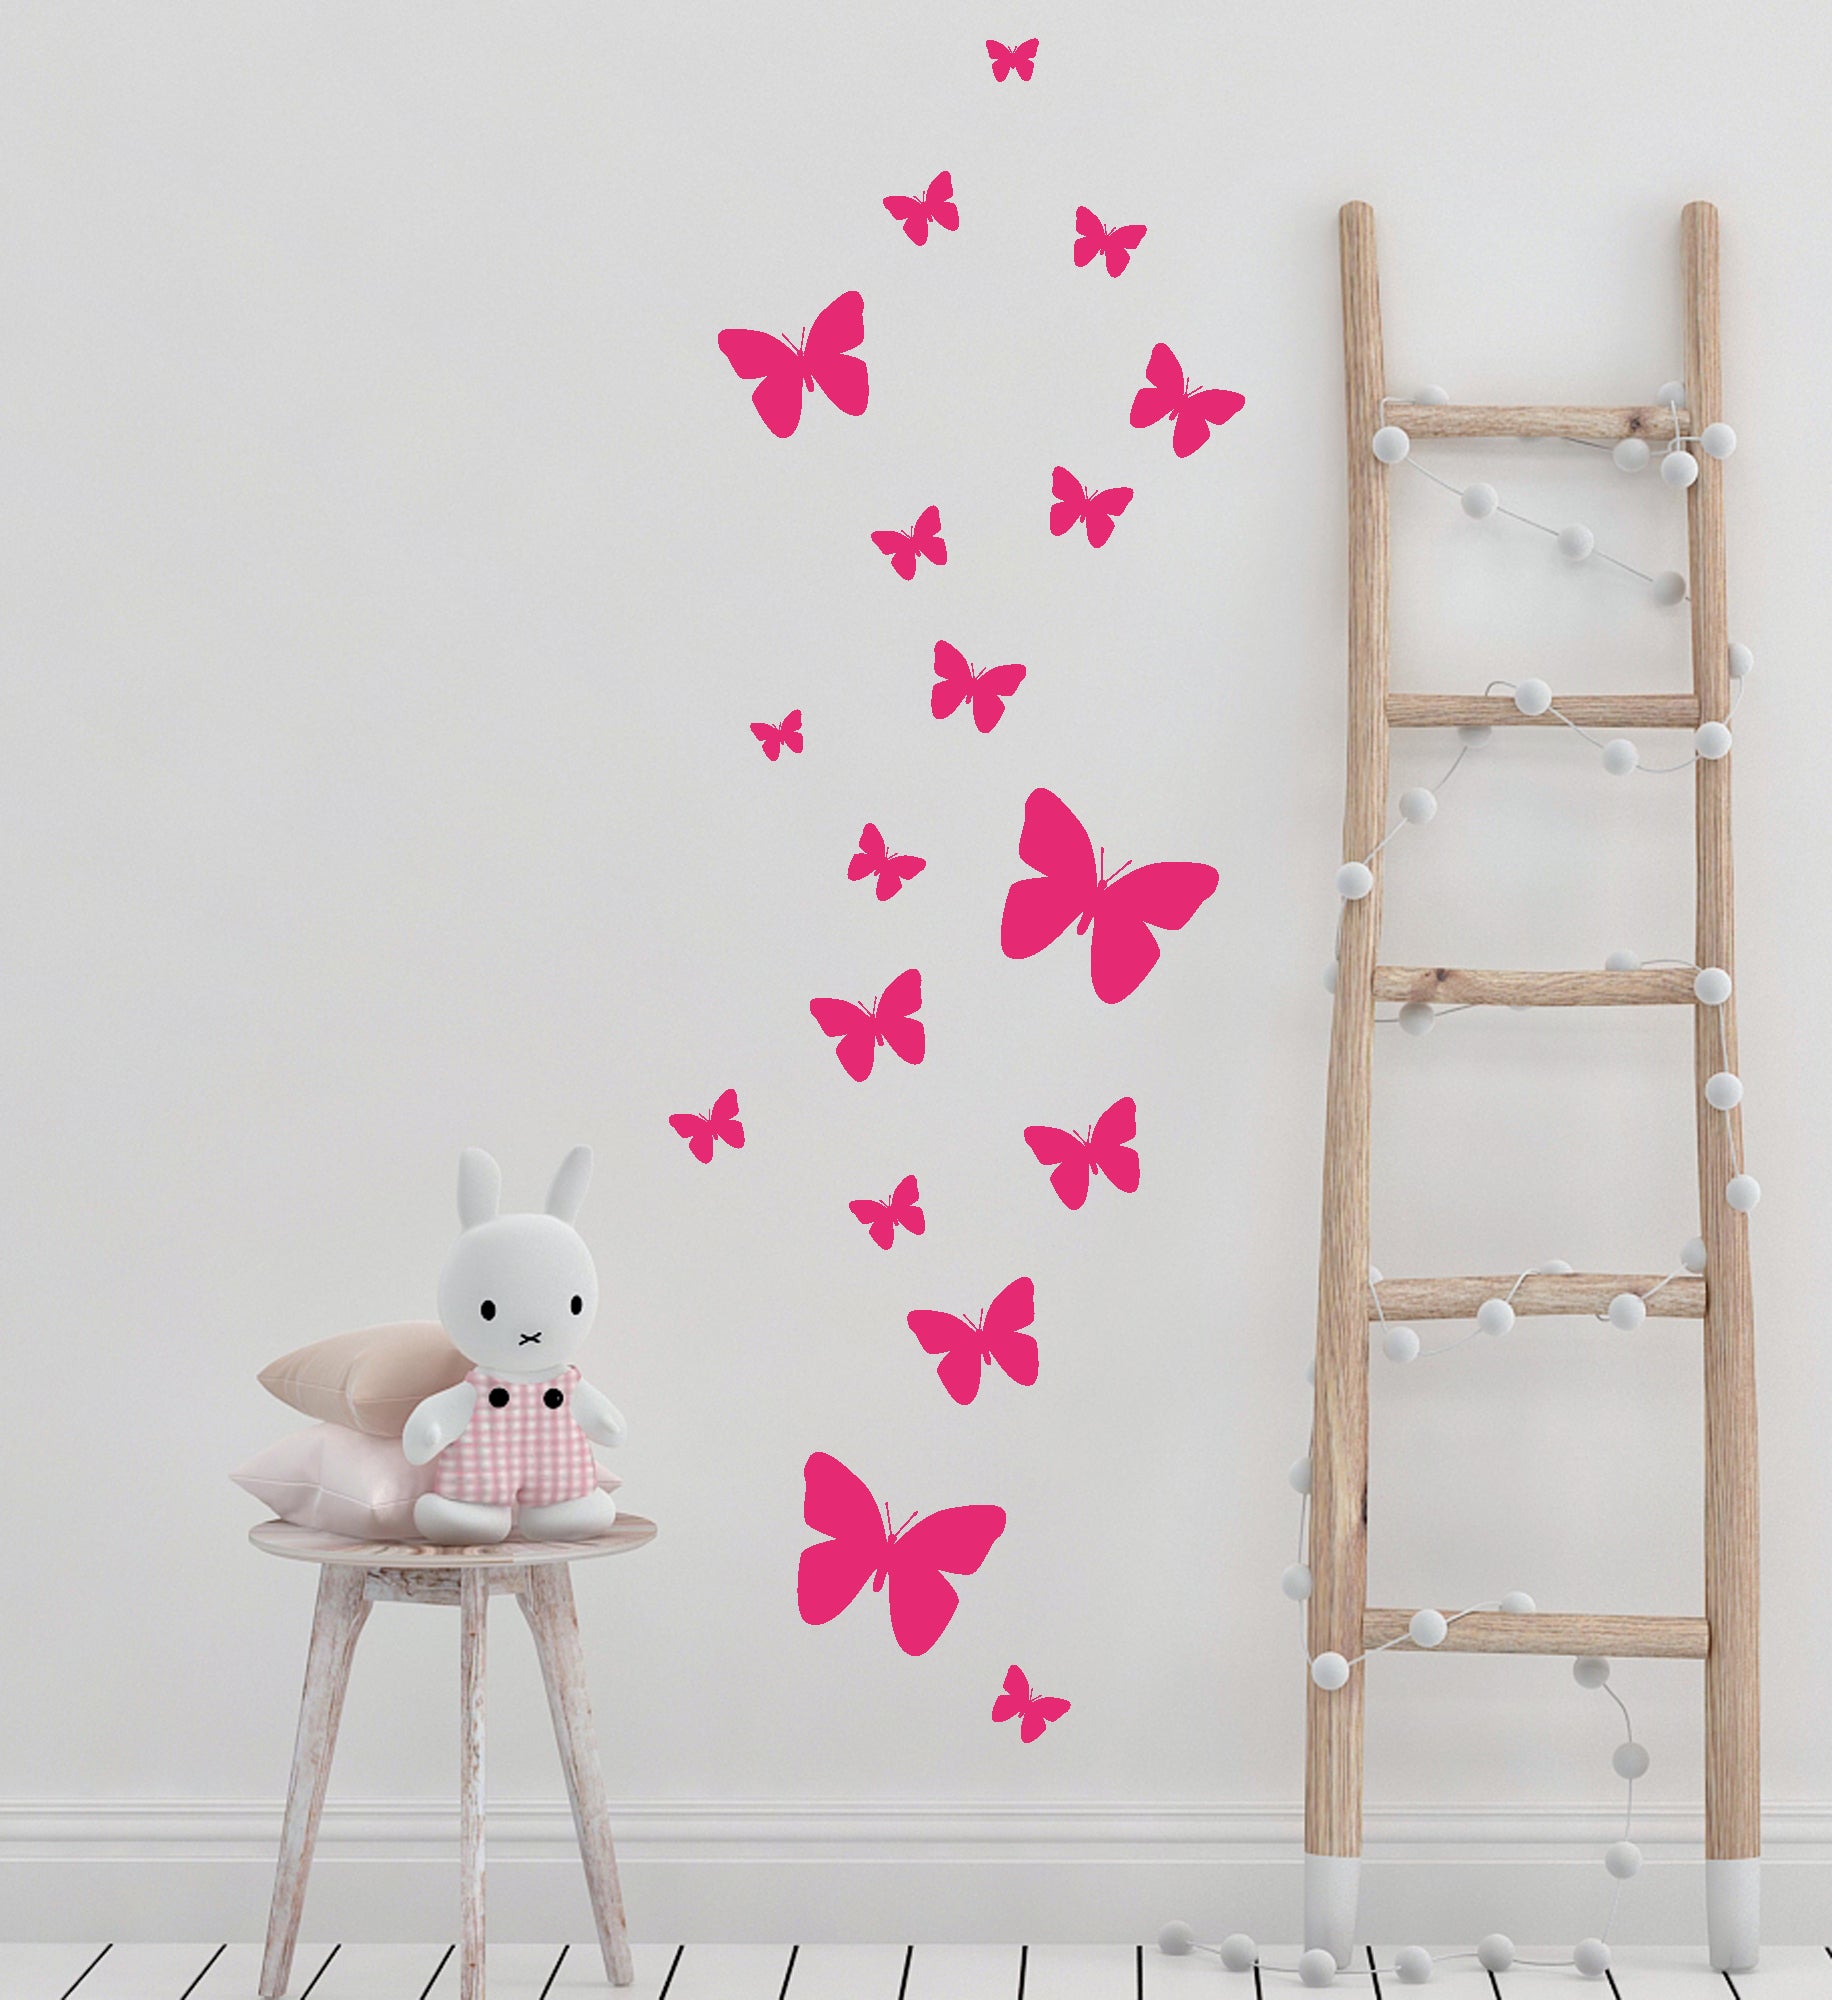 Butterfly Wall Decals -Girls Room Decor Stickers